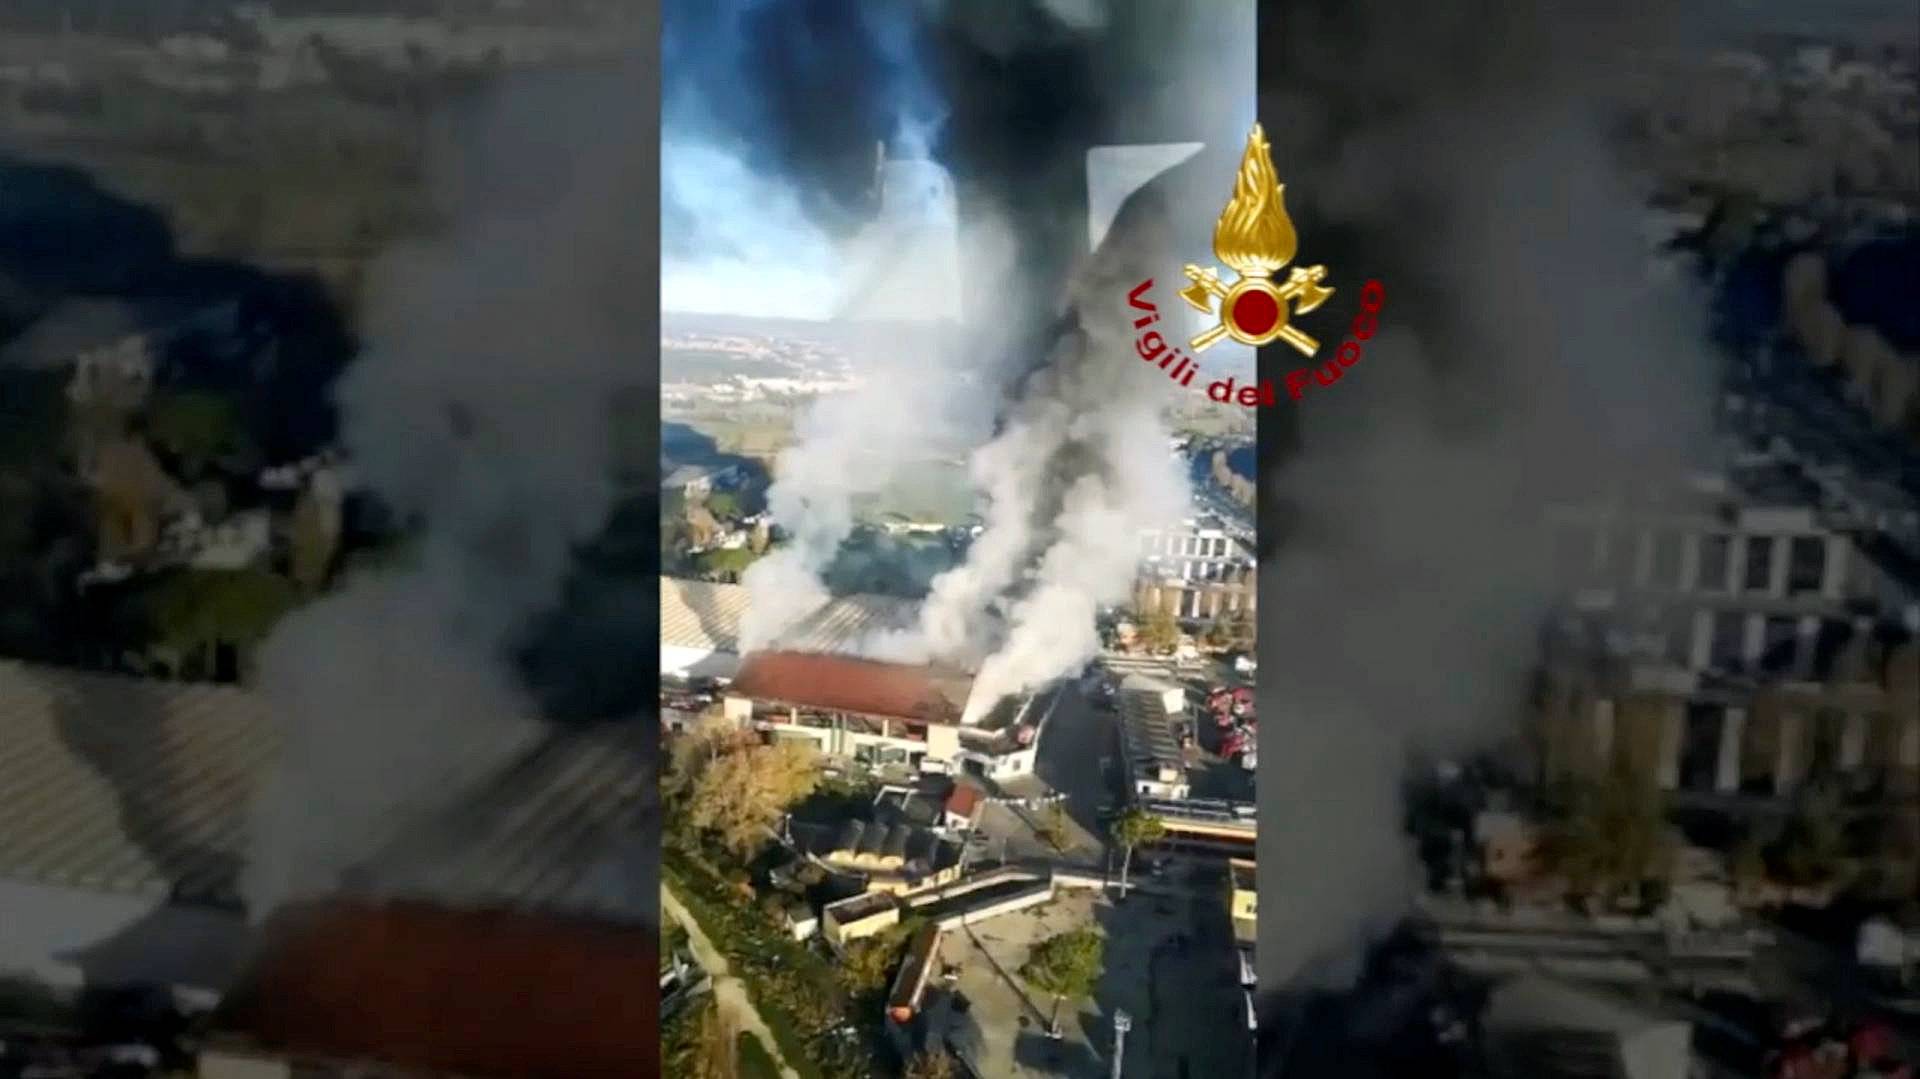 A general view from helicopter shows large fire that has broken out in a municipal rubbish dump on the northern outskirts of Rome